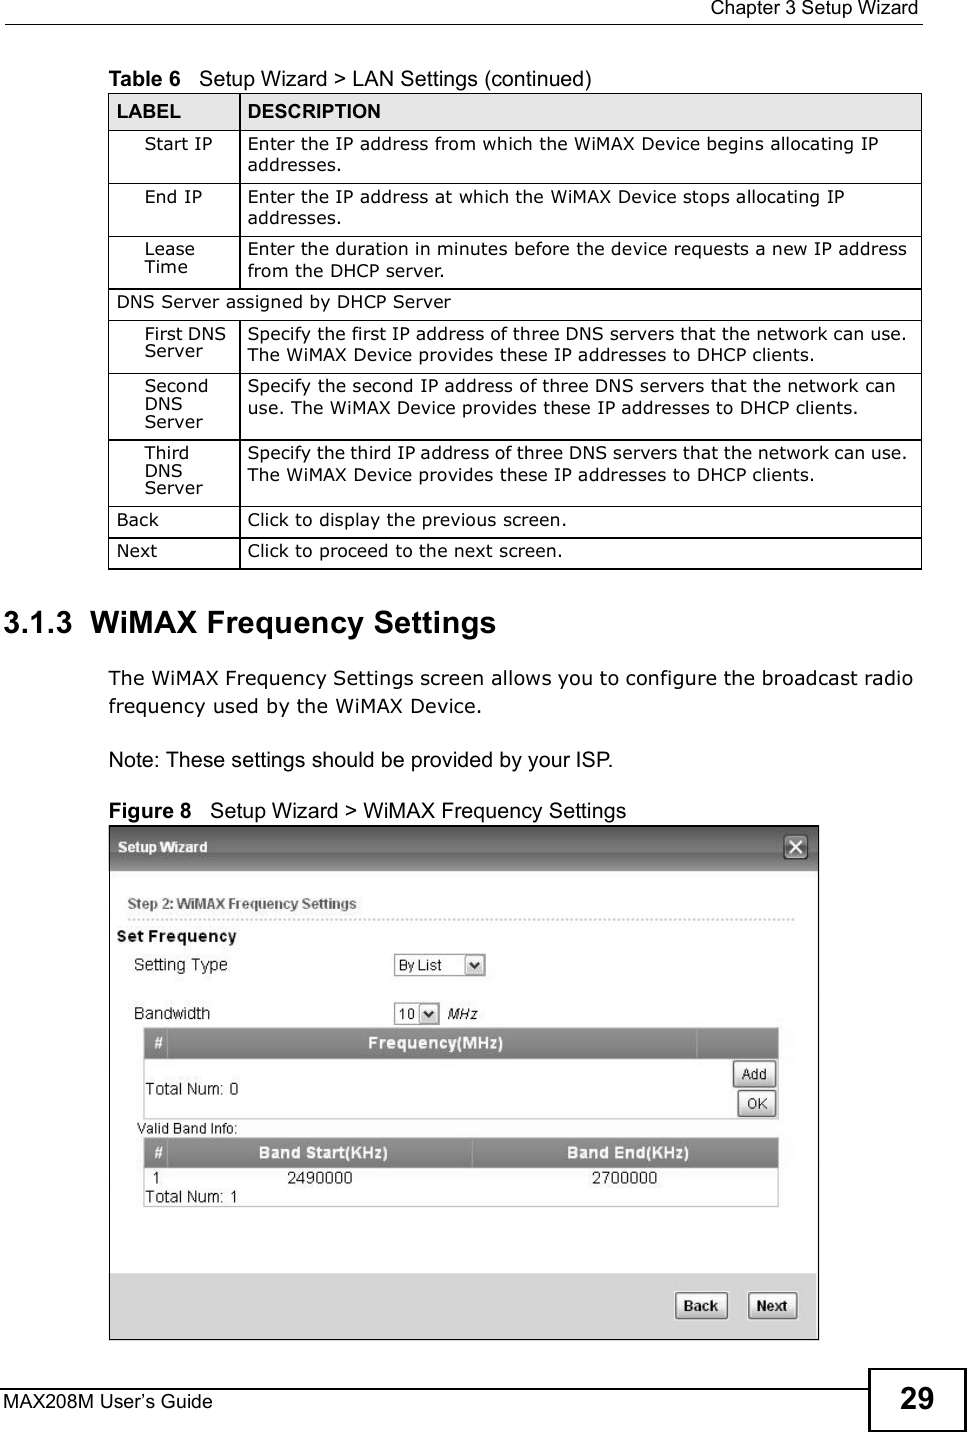  Chapter 3Setup WizardMAX208M User s Guide 293.1.3  WiMAX Frequency SettingsThe WiMAX Frequency Settings screen allows you to configure the broadcast radio frequency used by the WiMAX Device.Note: These settings should be provided by your ISP.Figure 8   Setup Wizard &gt; WiMAX Frequency SettingsStart IP Enter the IP address from which the WiMAX Device begins allocating IP addresses.End IP Enter the IP address at which the WiMAX Device stops allocating IP addresses.Lease TimeEnter the duration in minutes before the device requests a new IP address from the DHCP server.DNS Server assigned by DHCP ServerFirst DNS ServerSpecify the first IP address of three DNS servers that the network can use. The WiMAX Device provides these IP addresses to DHCP clients.Second DNS ServerSpecify the second IP address of three DNS servers that the network can use. The WiMAX Device provides these IP addresses to DHCP clients.Third DNS ServerSpecify the third IP address of three DNS servers that the network can use. The WiMAX Device provides these IP addresses to DHCP clients.Back Click to display the previous screen.Next Click to proceed to the next screen. Table 6   Setup Wizard &gt; LAN Settings (continued)LABEL DESCRIPTION